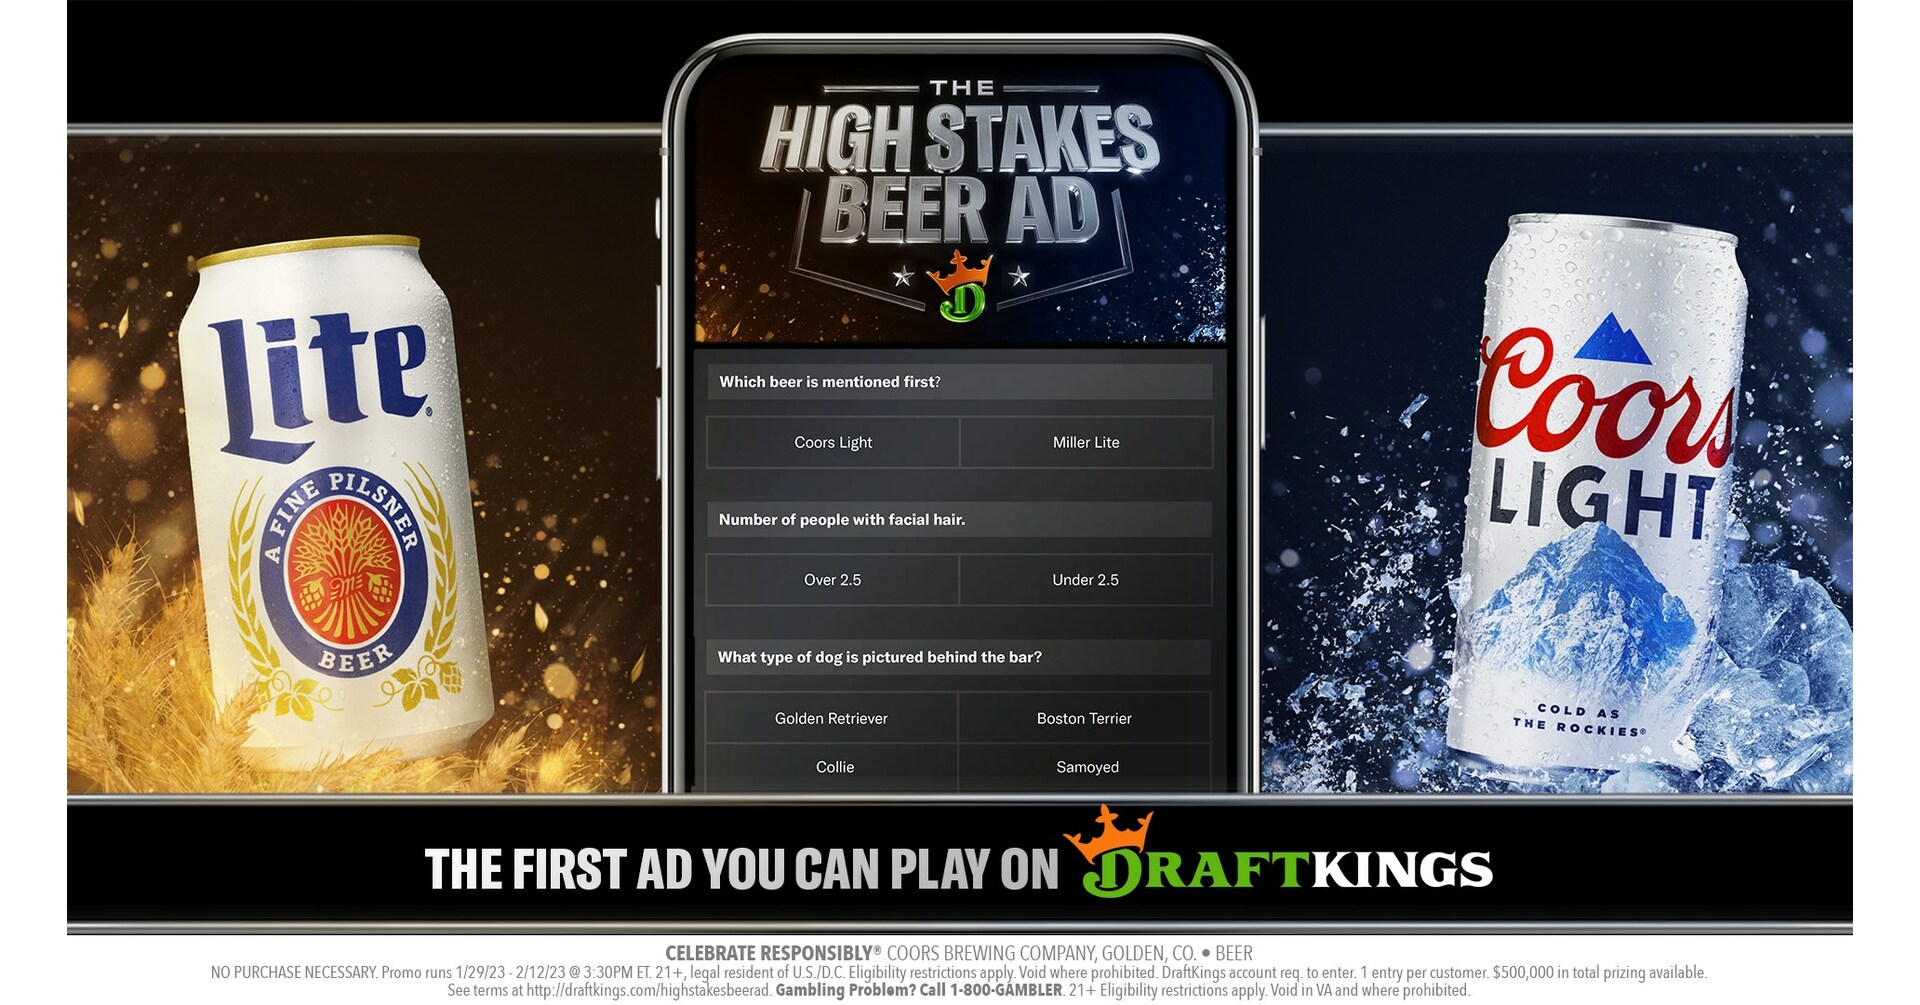 https://mma.prnewswire.com/media/1991464/Molson_Coors_High_Stakes_Beer_Ad.jpg?p=facebook